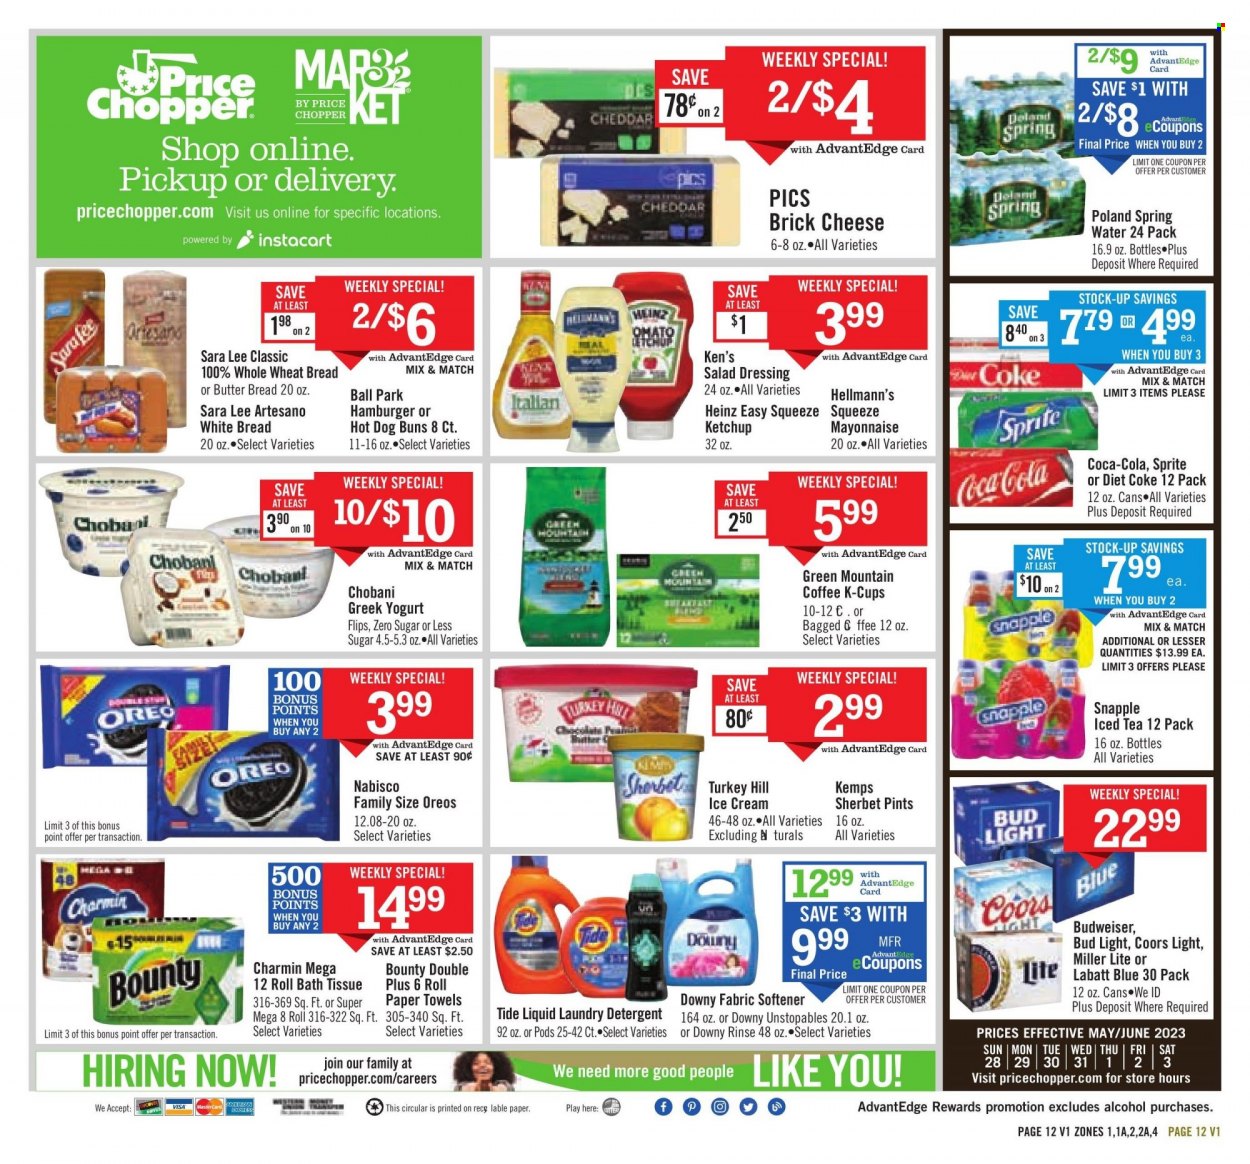 thumbnail - Price Chopper Flyer - 05/28/2023 - 06/03/2023 - Sales products - wheat bread, white bread, buns, Sara Lee, brick cheese, cheddar, Kemps, greek yoghurt, Oreo, Chobani, mayonnaise, Hellmann’s, ice cream, sherbet, Bounty, Nabisco, Heinz, salad dressing, ketchup, dressing, Coca-Cola, Sprite, ice tea, Diet Coke, soft drink, Snapple, Coke, spring water, water, coffee capsules, K-Cups, Green Mountain, beer, Bud Light, turkey, bath tissue, kitchen towels, paper towels, Charmin, detergent, Tide, Unstopables, fabric softener, laundry detergent, Downy Laundry, Budweiser, Miller Lite, Coors. Page 12.